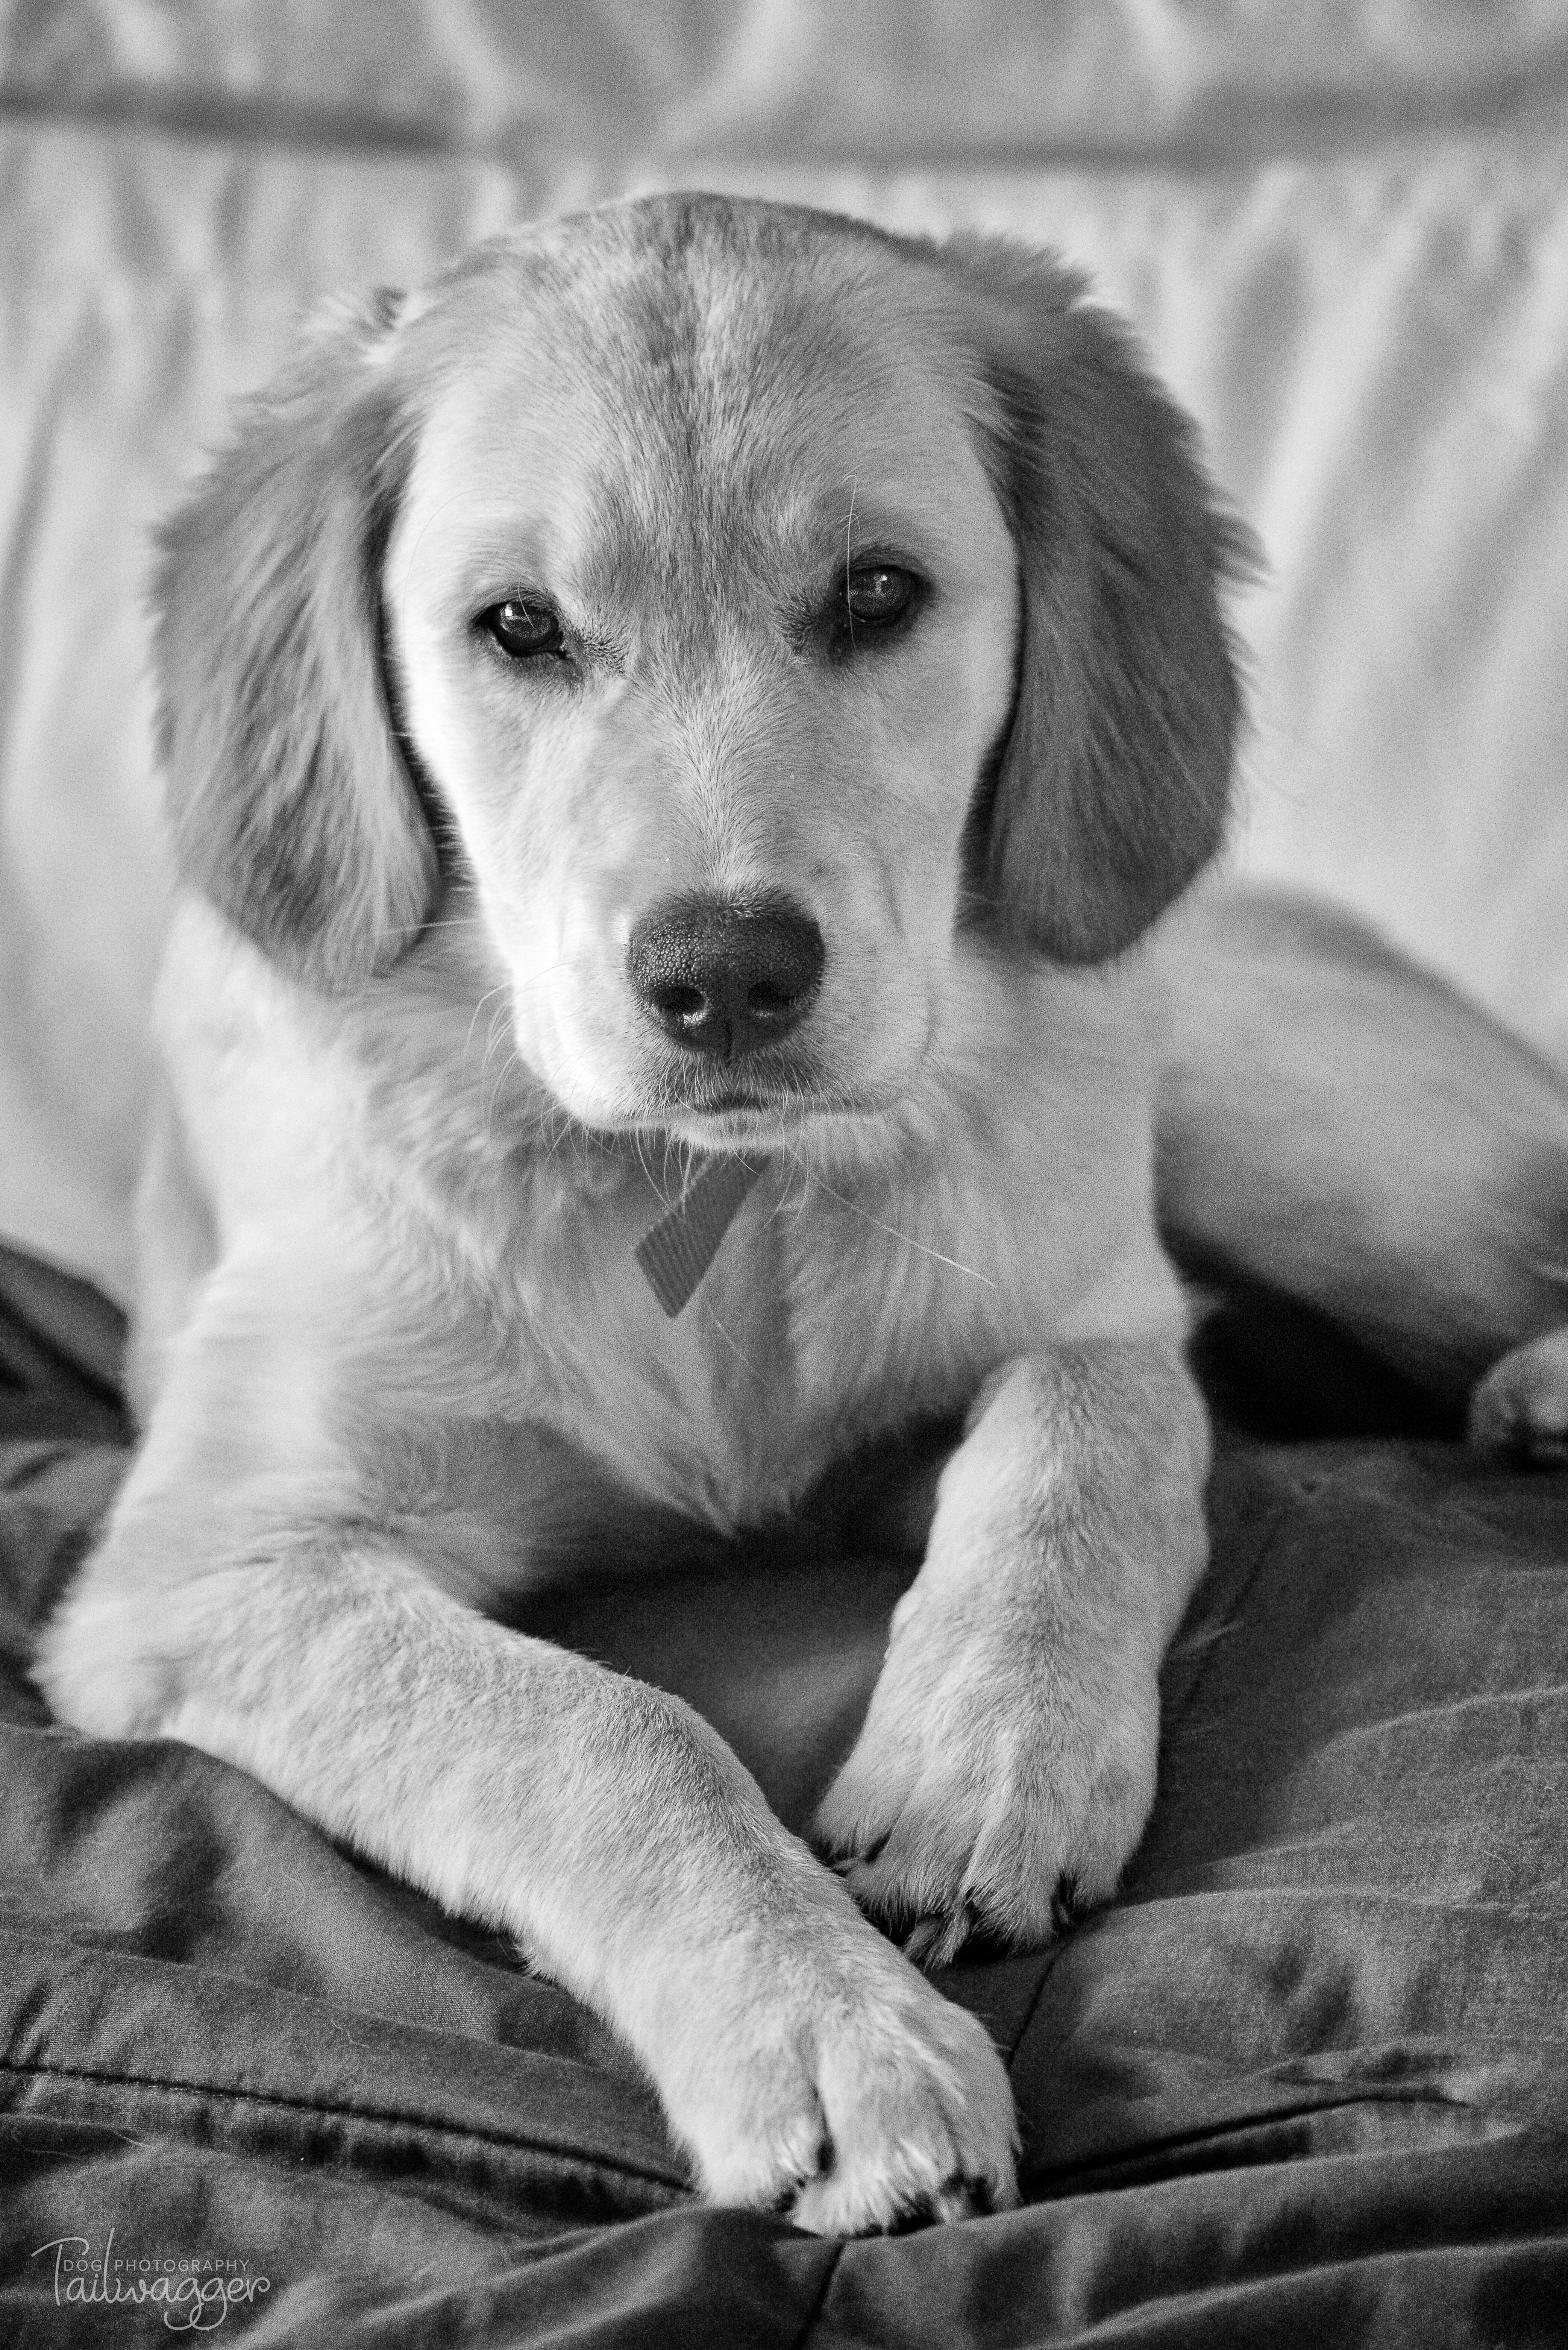 Black and white image of a 5 month old Golden Retriever pup lying on a chair.